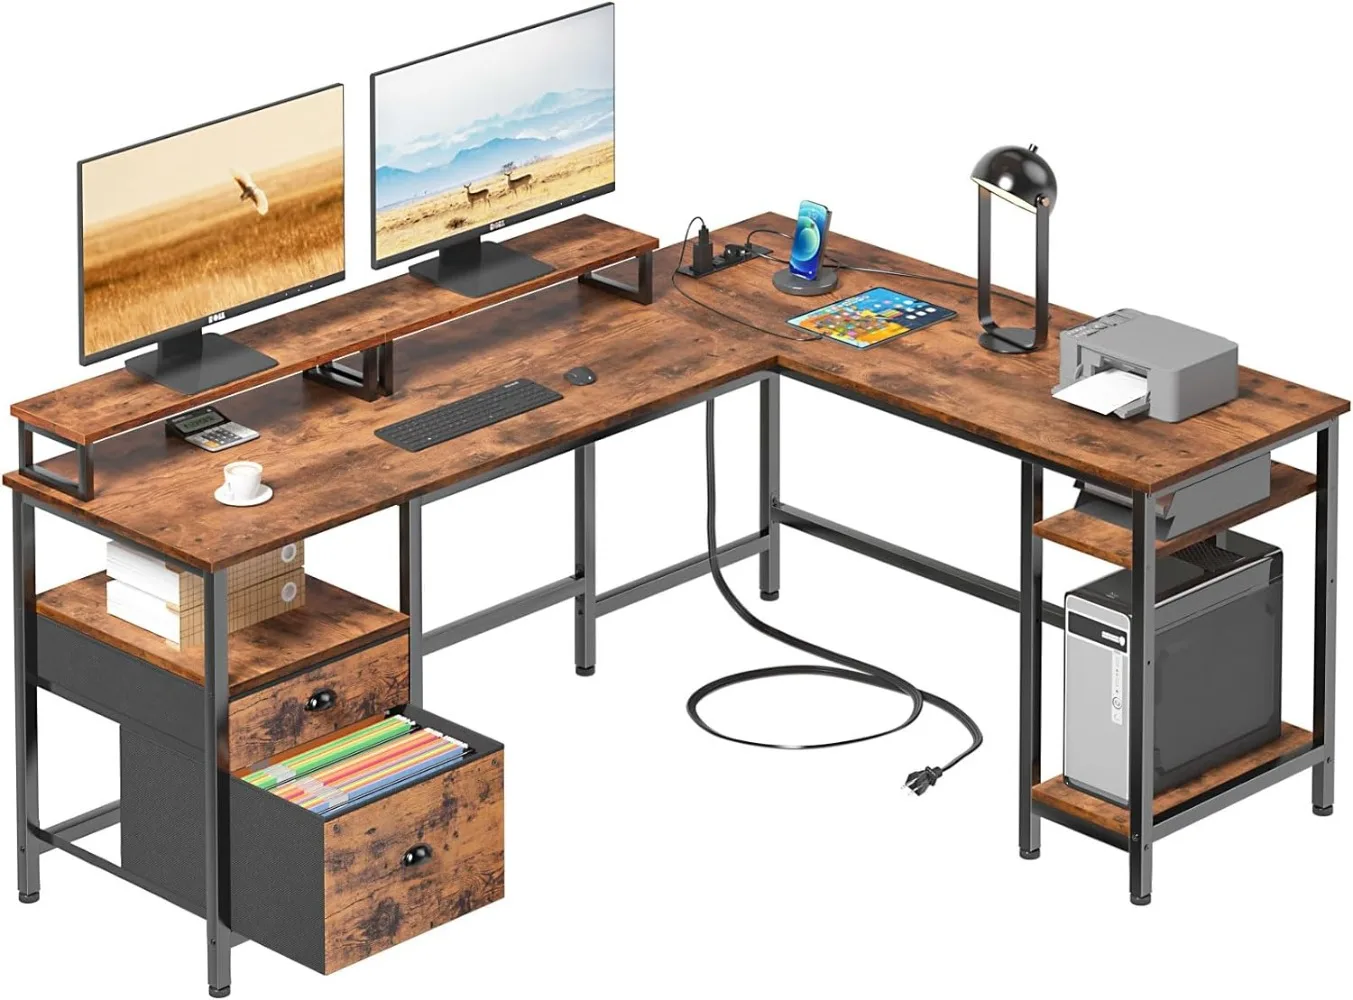 Furologee 66” L Shaped Desk with Power Outlet, Reversible Computer Desk with File Drawer & 2 Monitor Stands, Home Office Desk